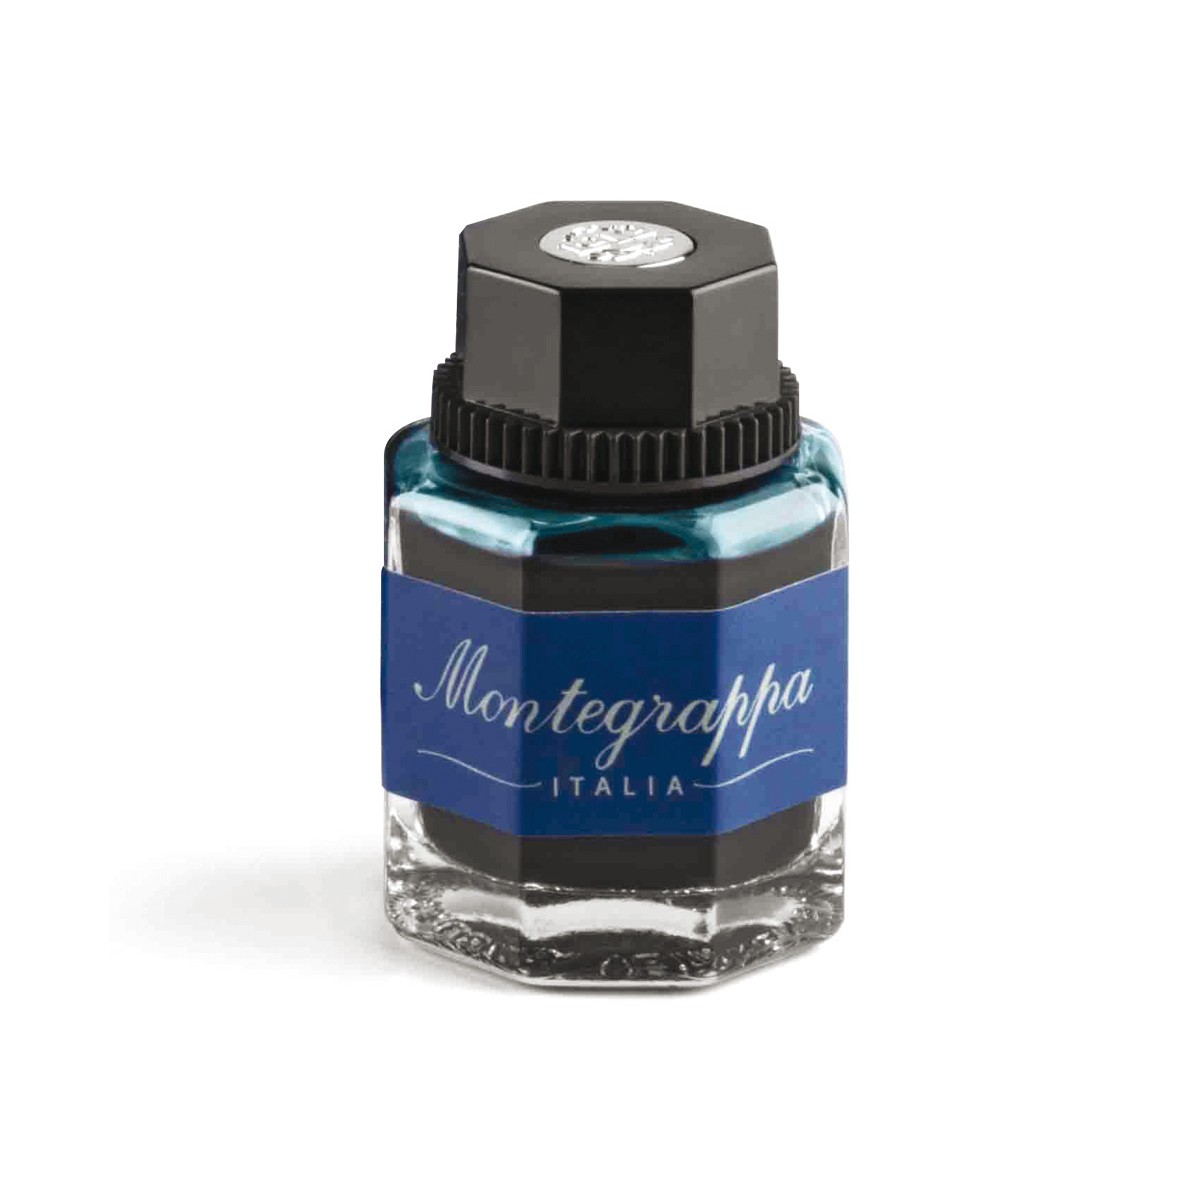 Motegrappa - Ink bottle - Turquoise